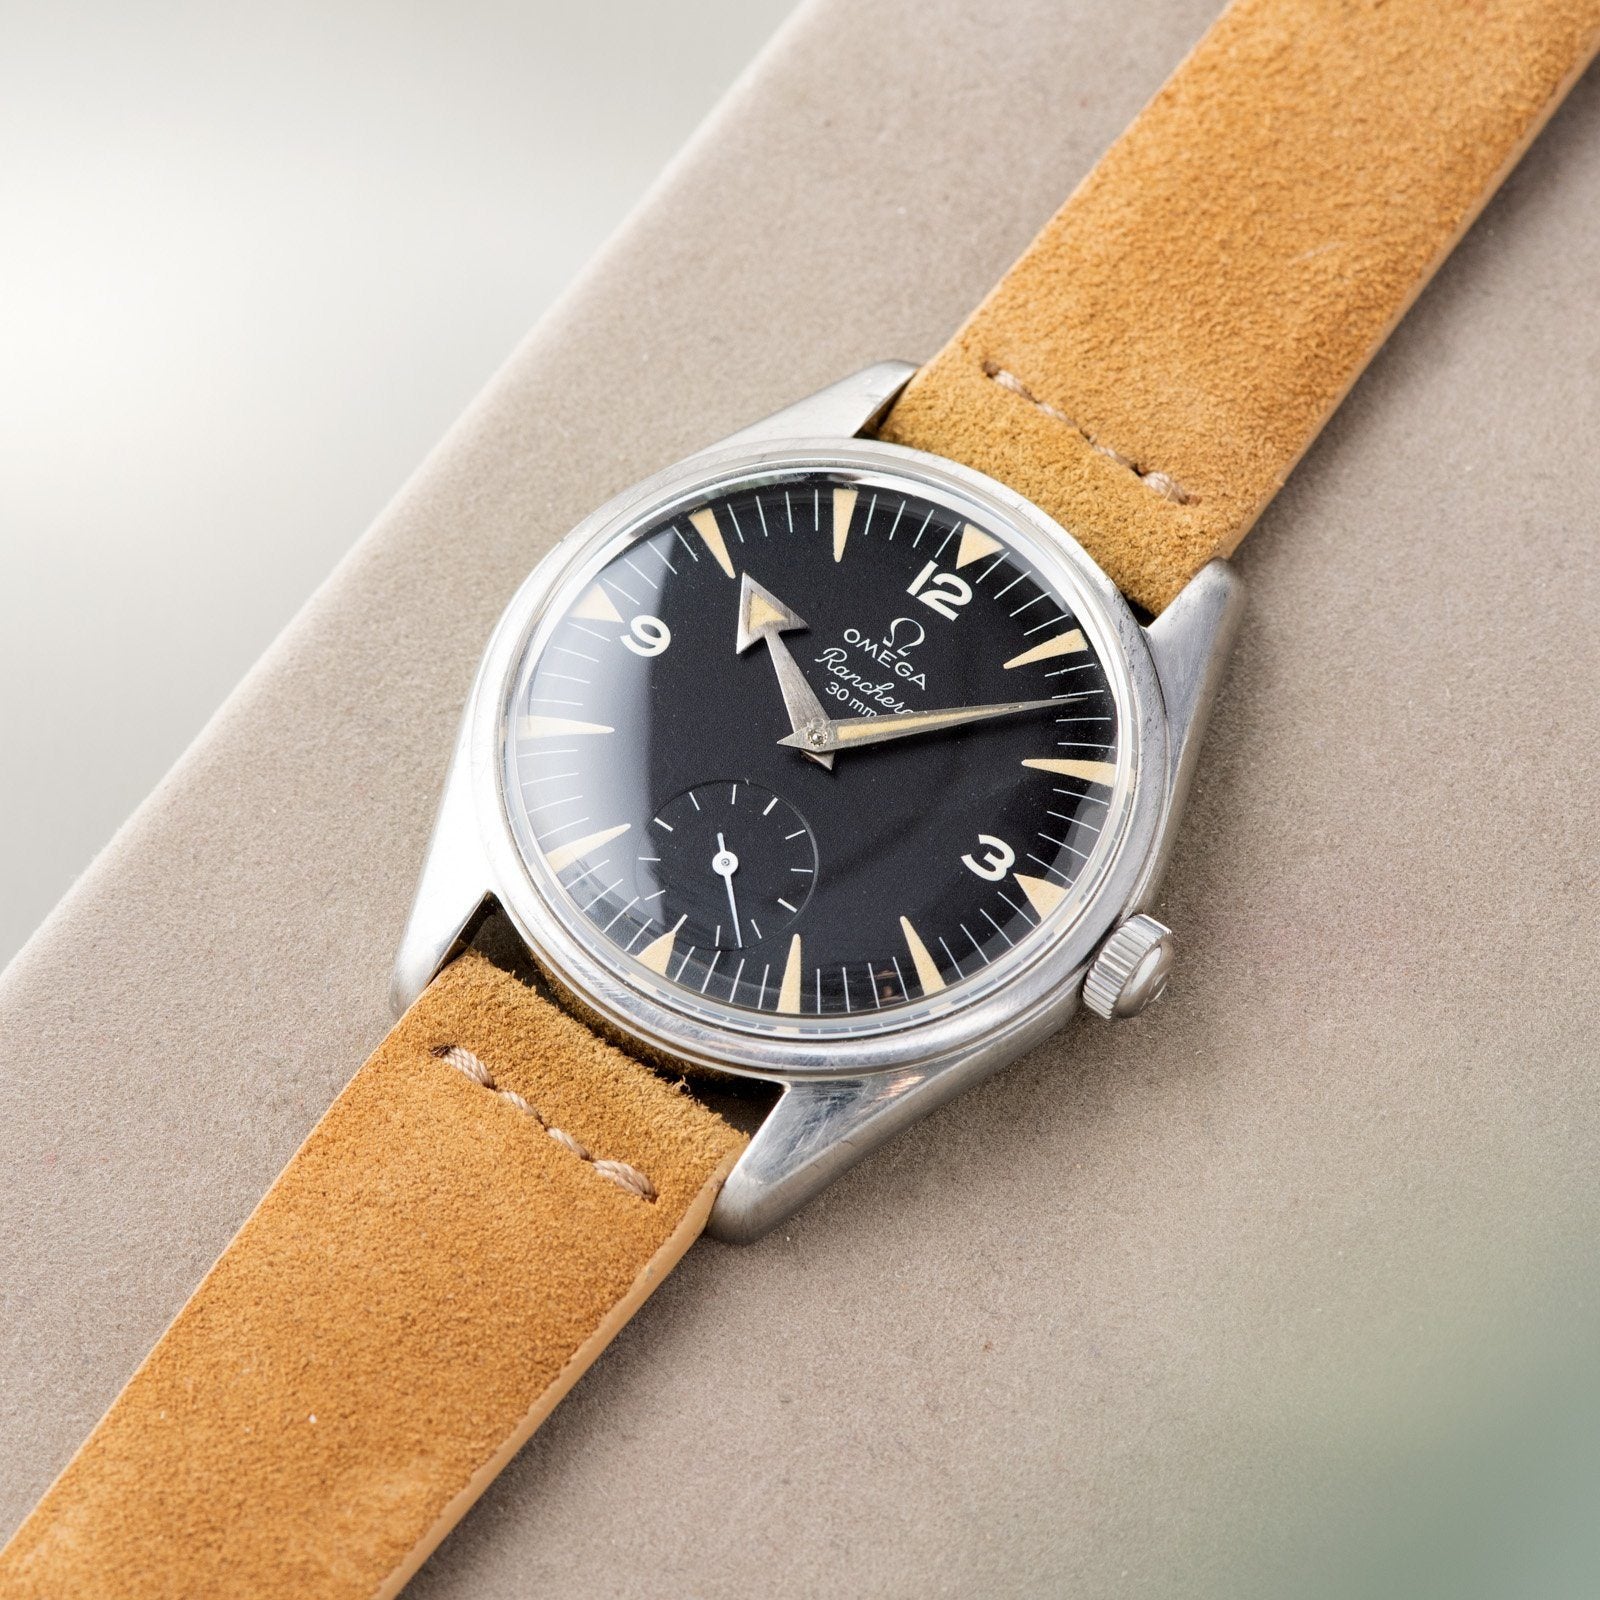 Omega Ranchero CK2990 Broad Arrow Hands and Archive Extract